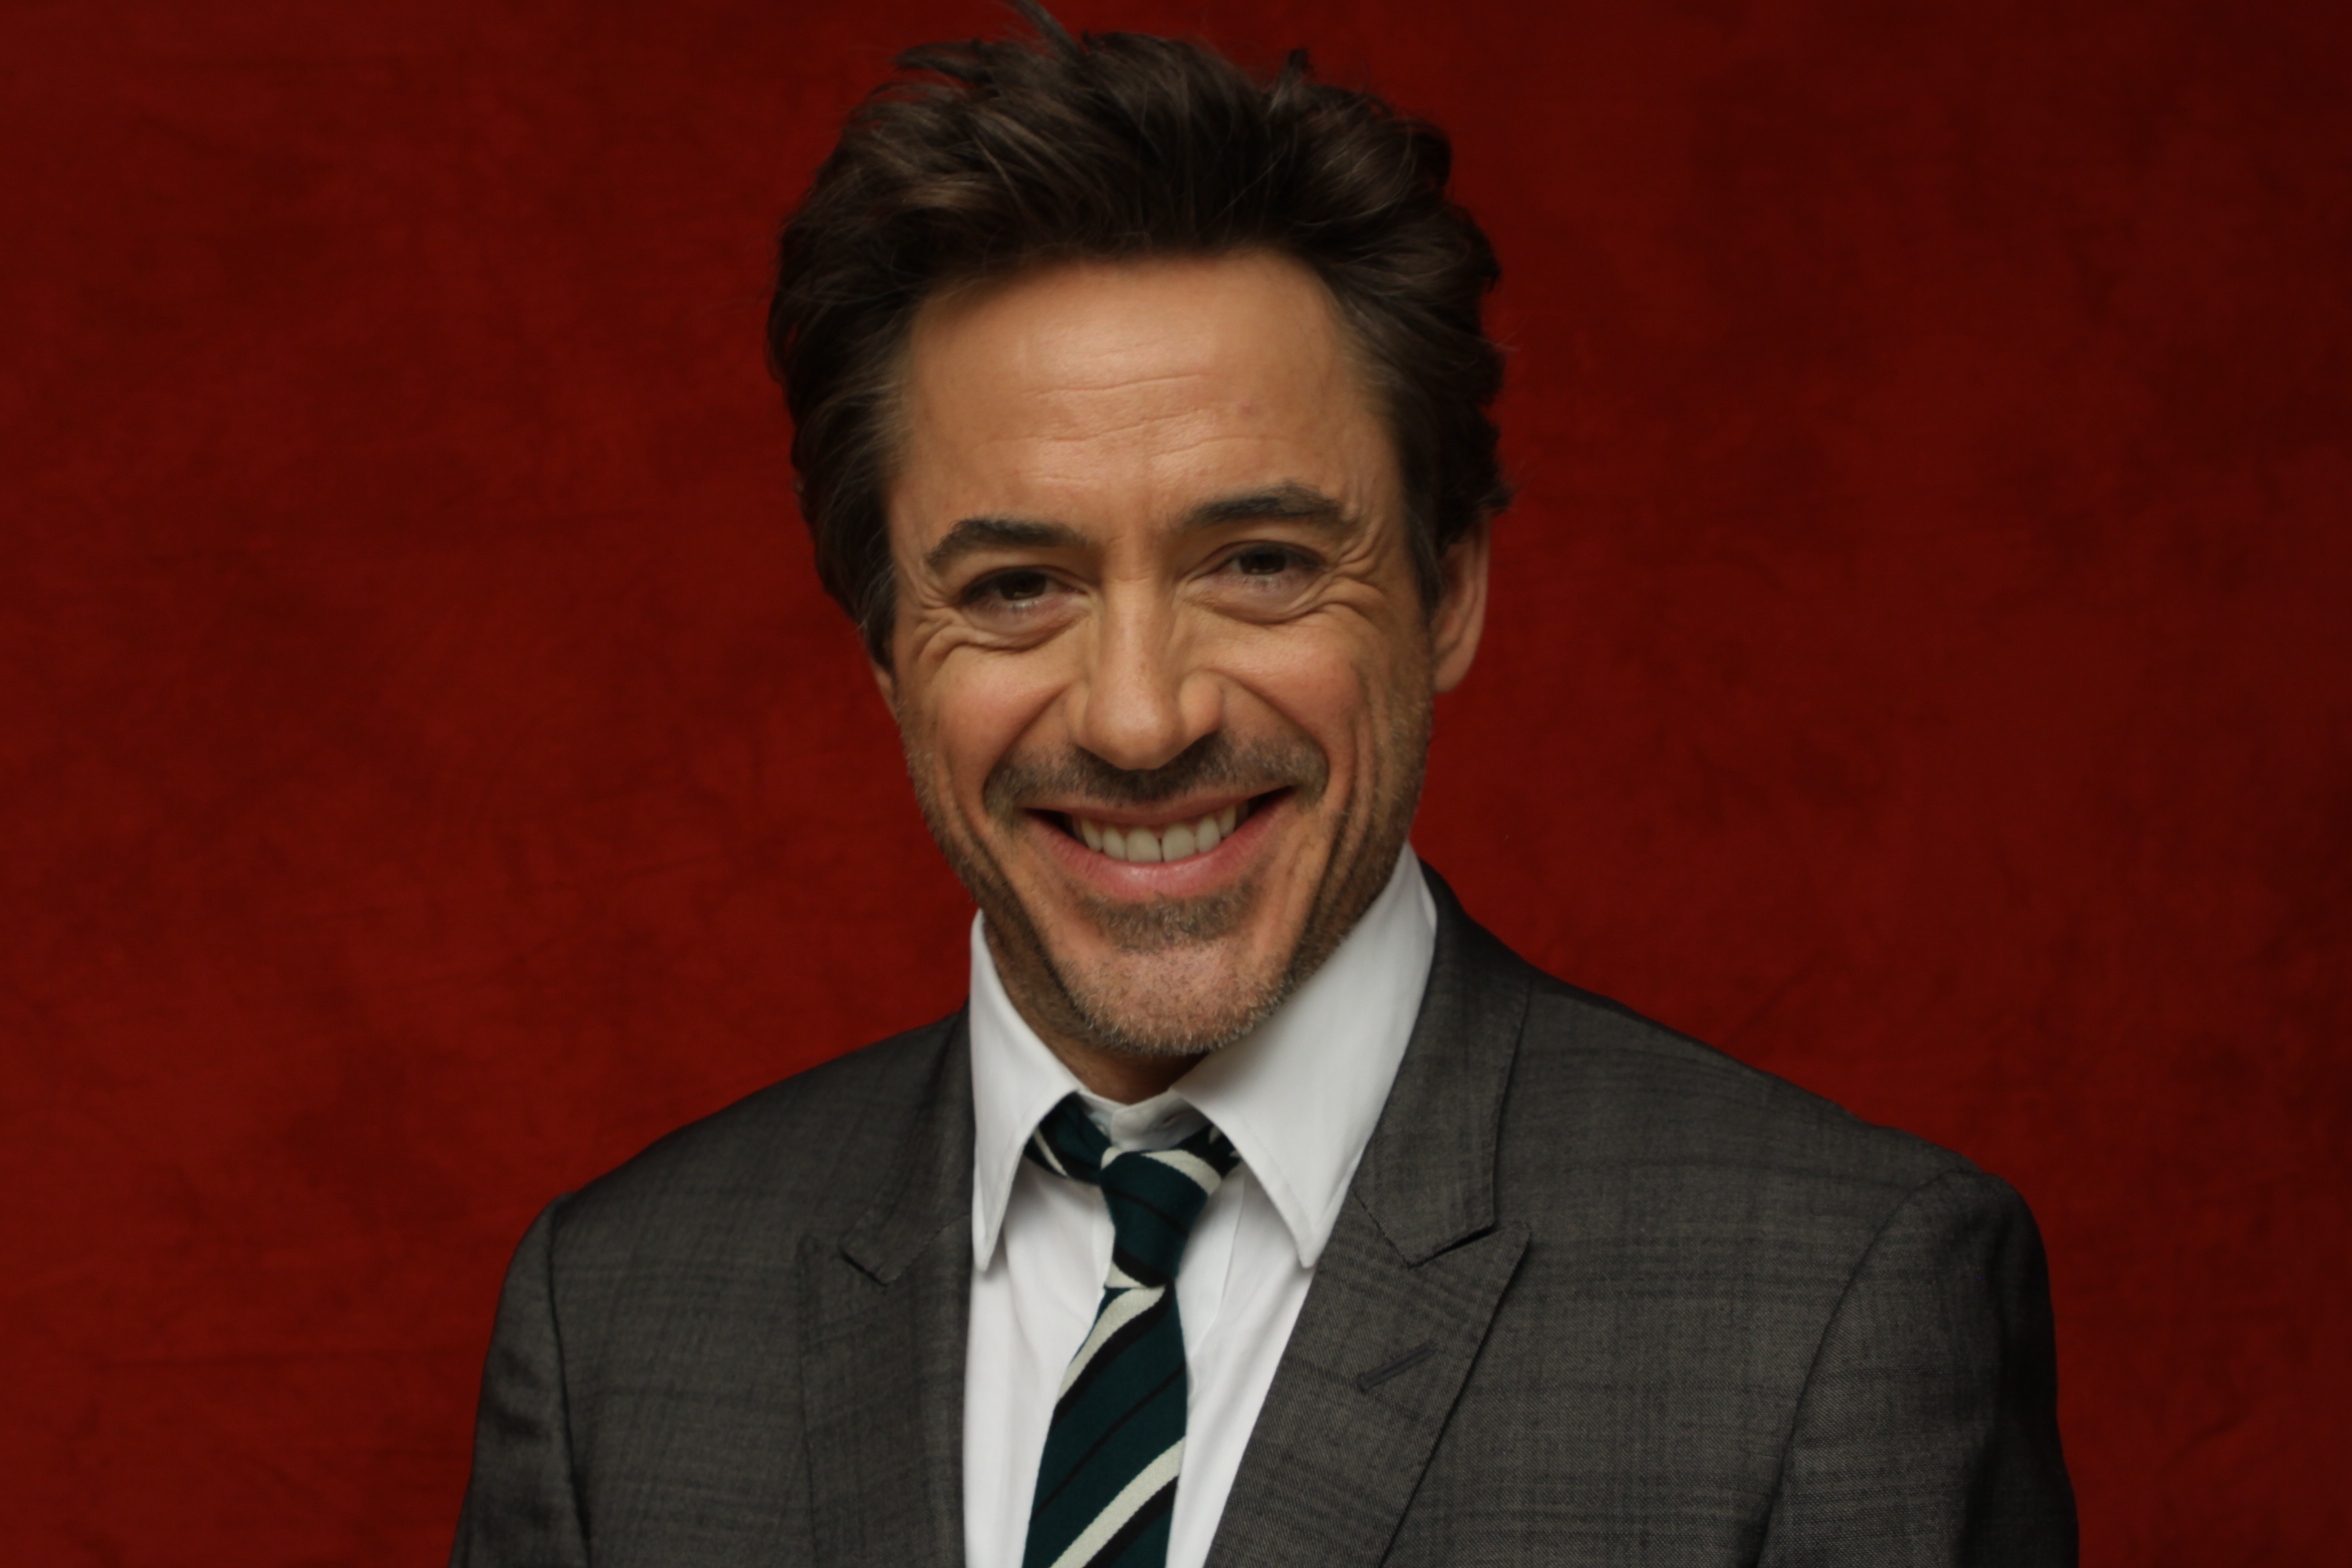 Movie News: Robert Downey Jr. is about to become a Chef